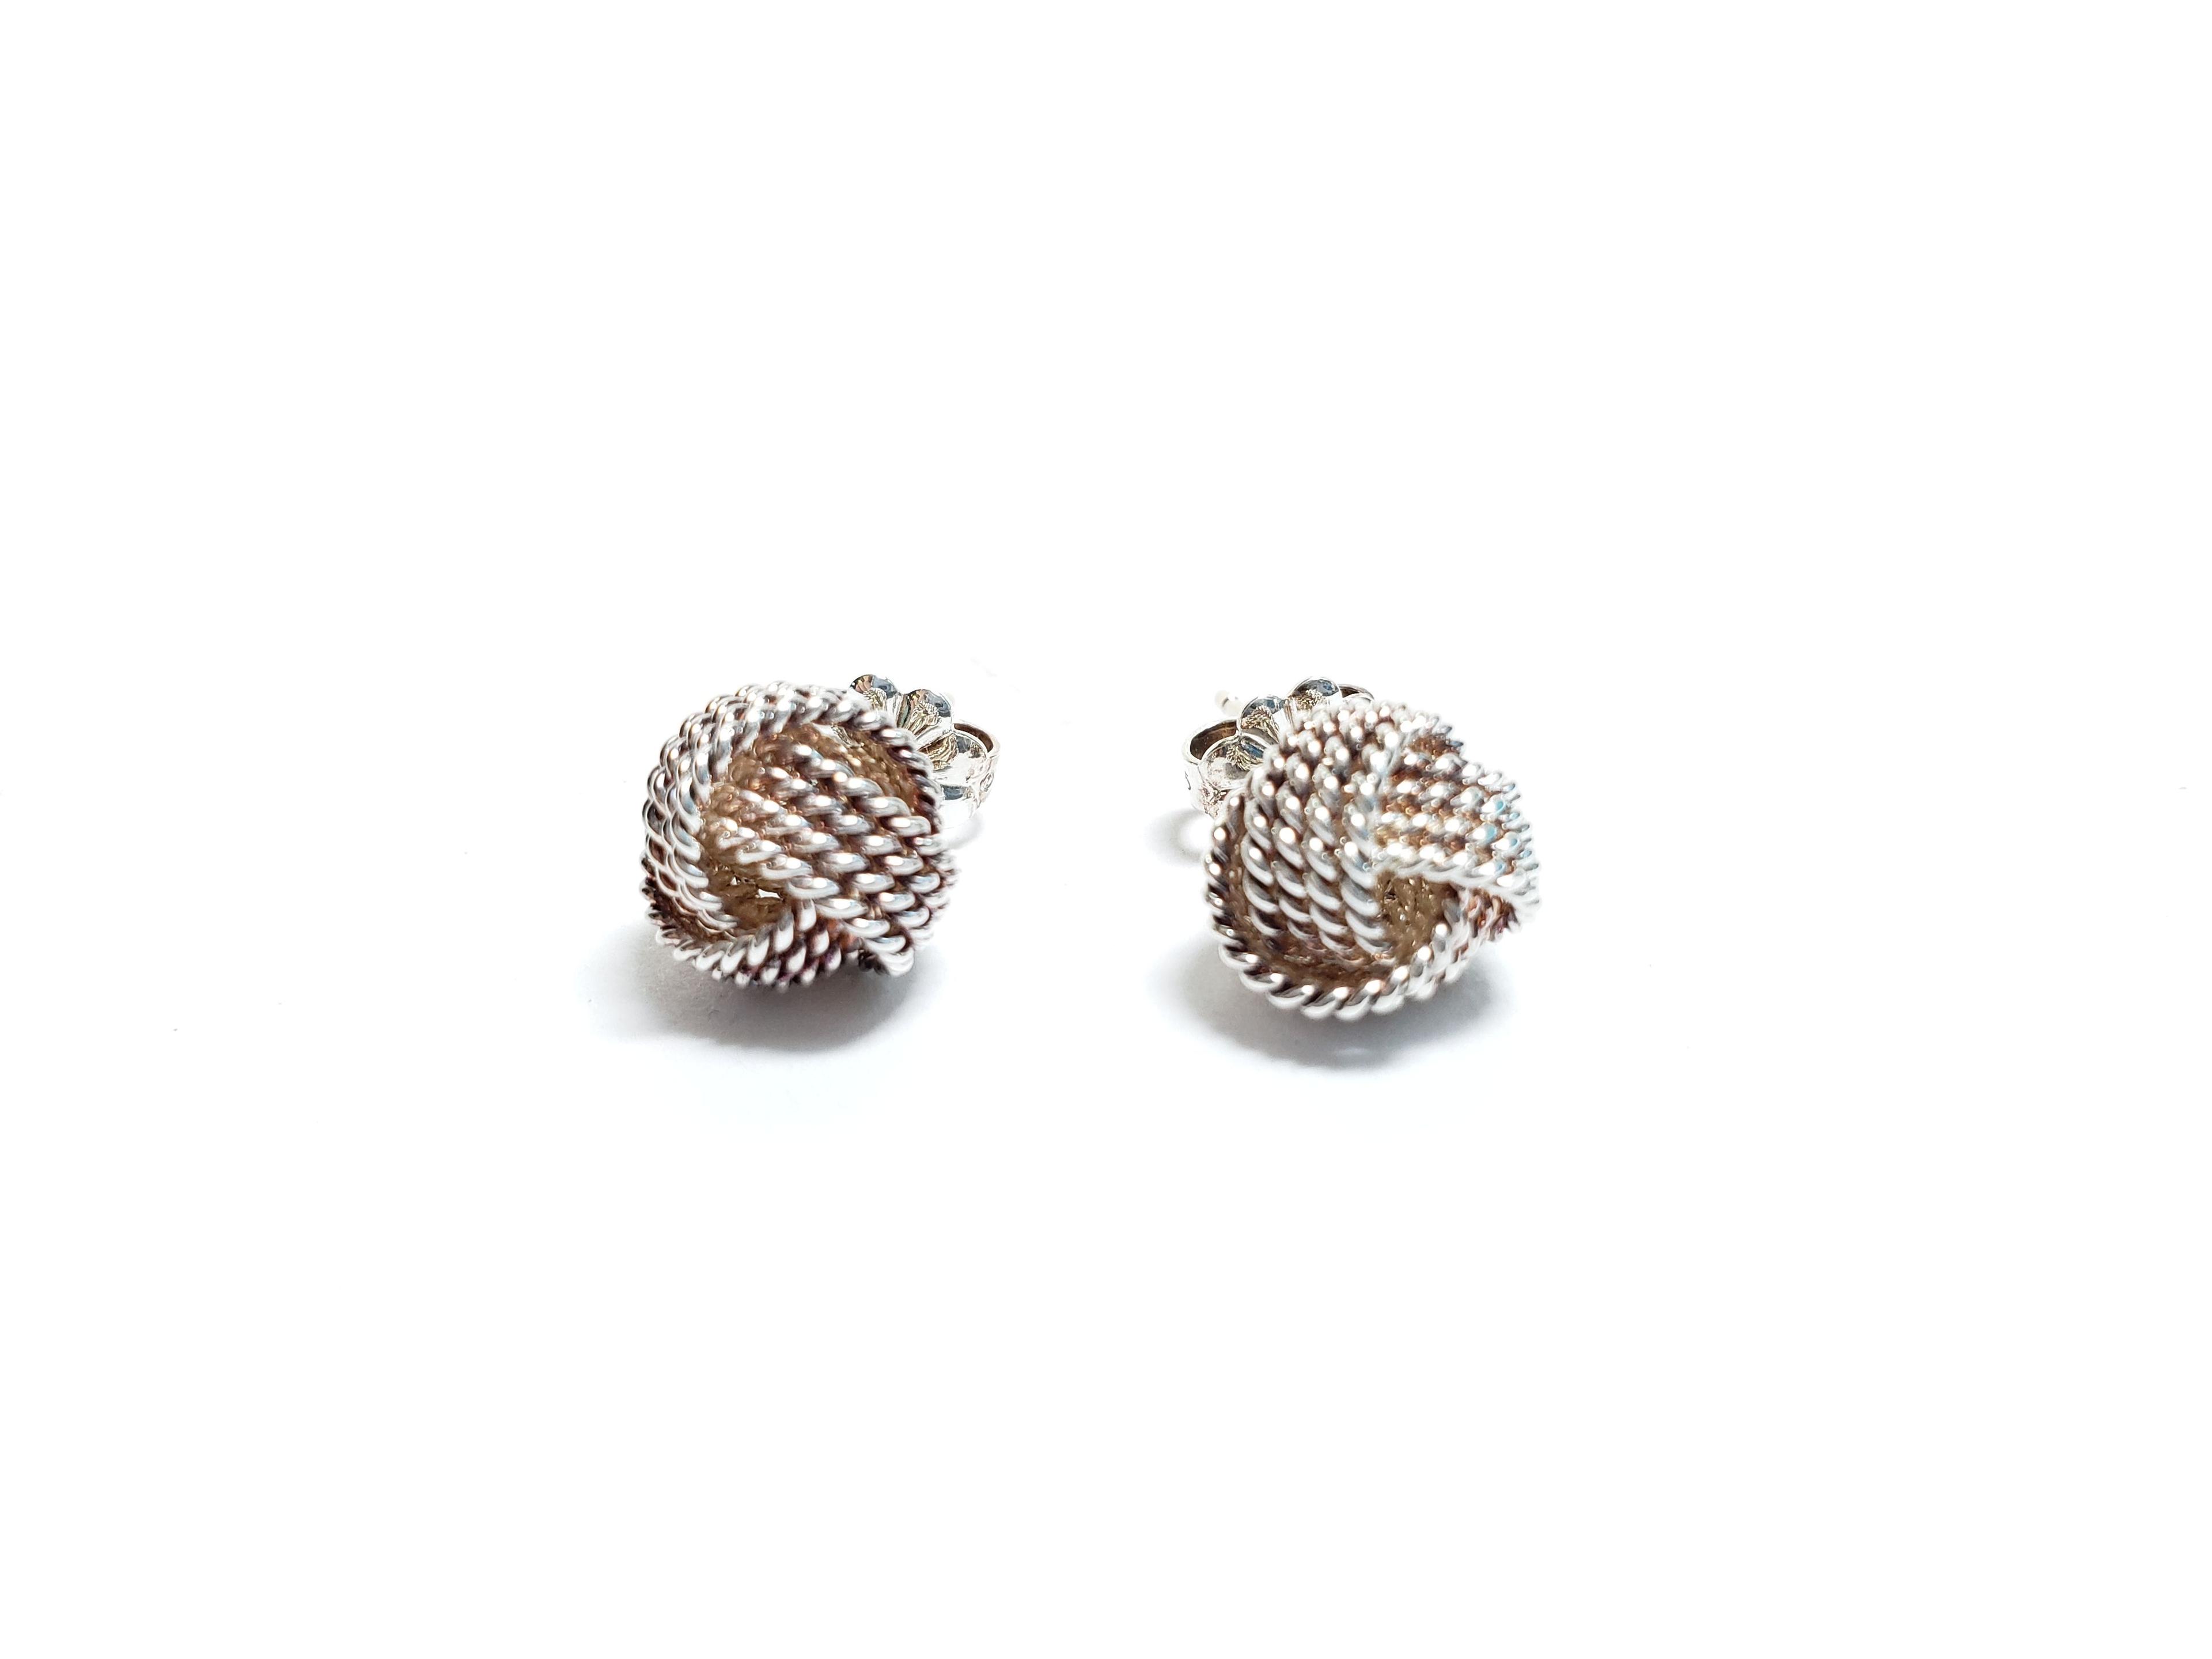 Authentic Tiffany & Co. Silver 925 Mesh Ball Earrings with Original Pouch